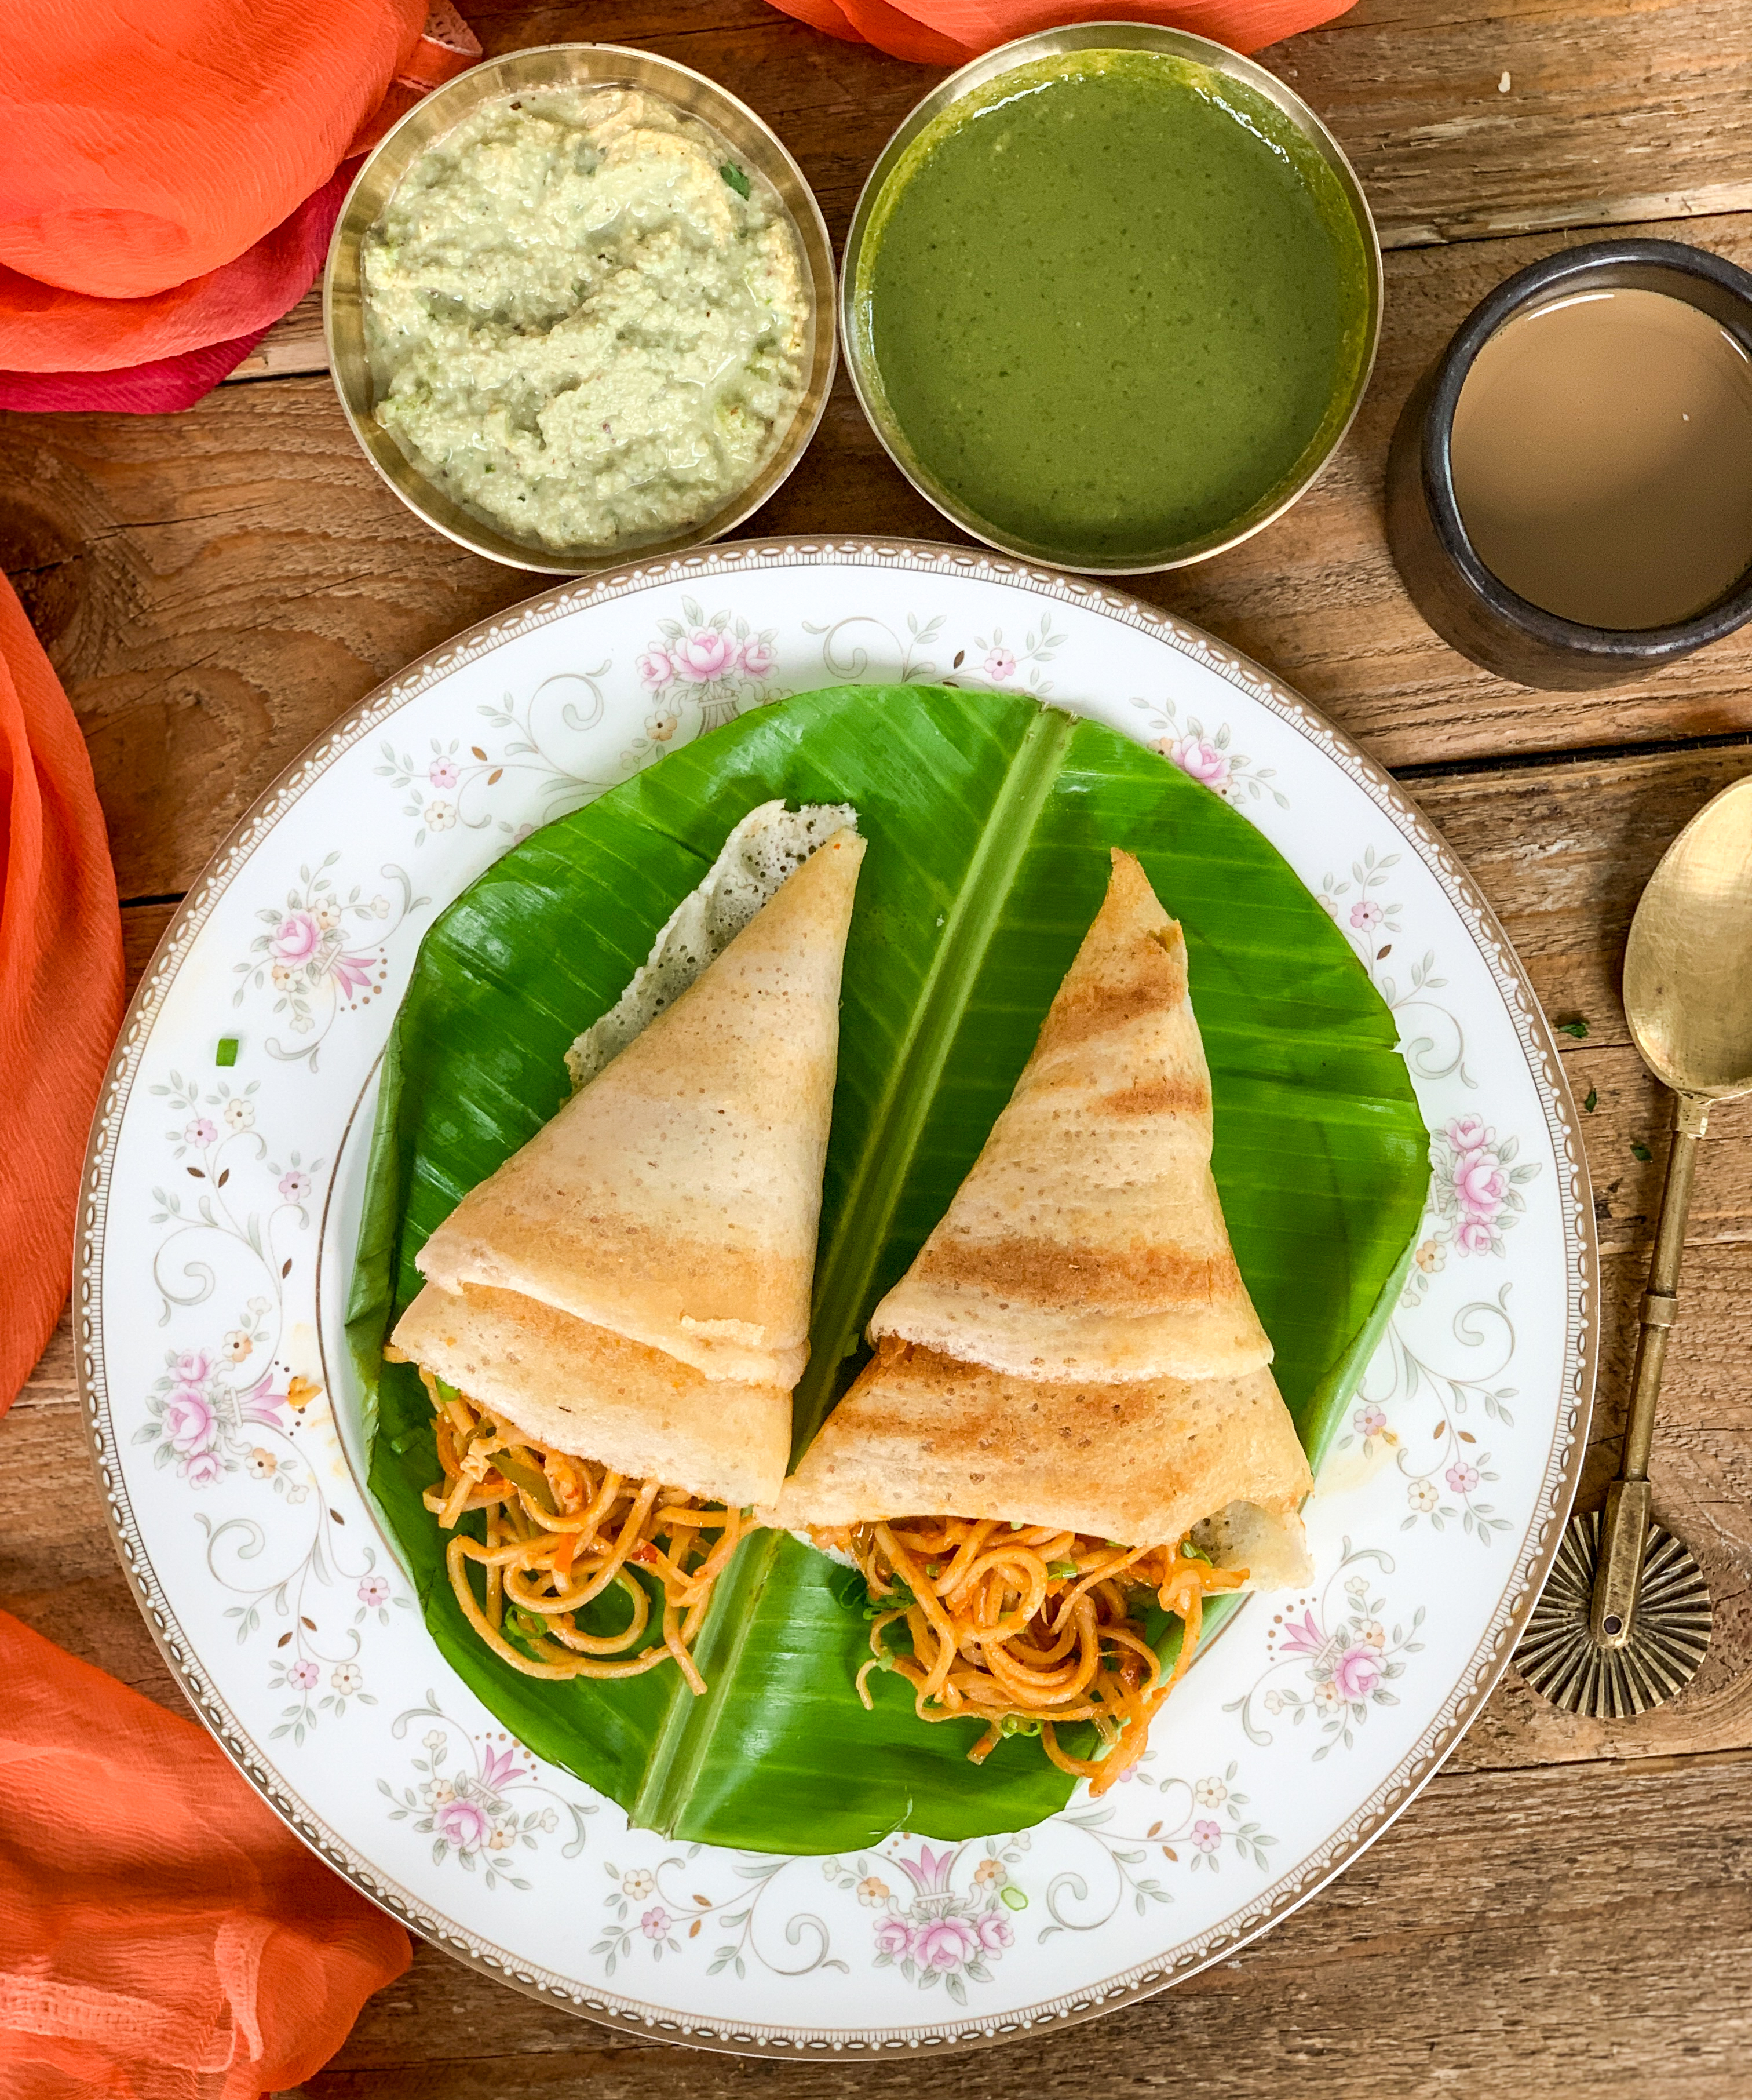 Recipes With Dosa Batter Easy Ways To Make 6 Amazing Dosa Recipes From One Simple Dosa Batter